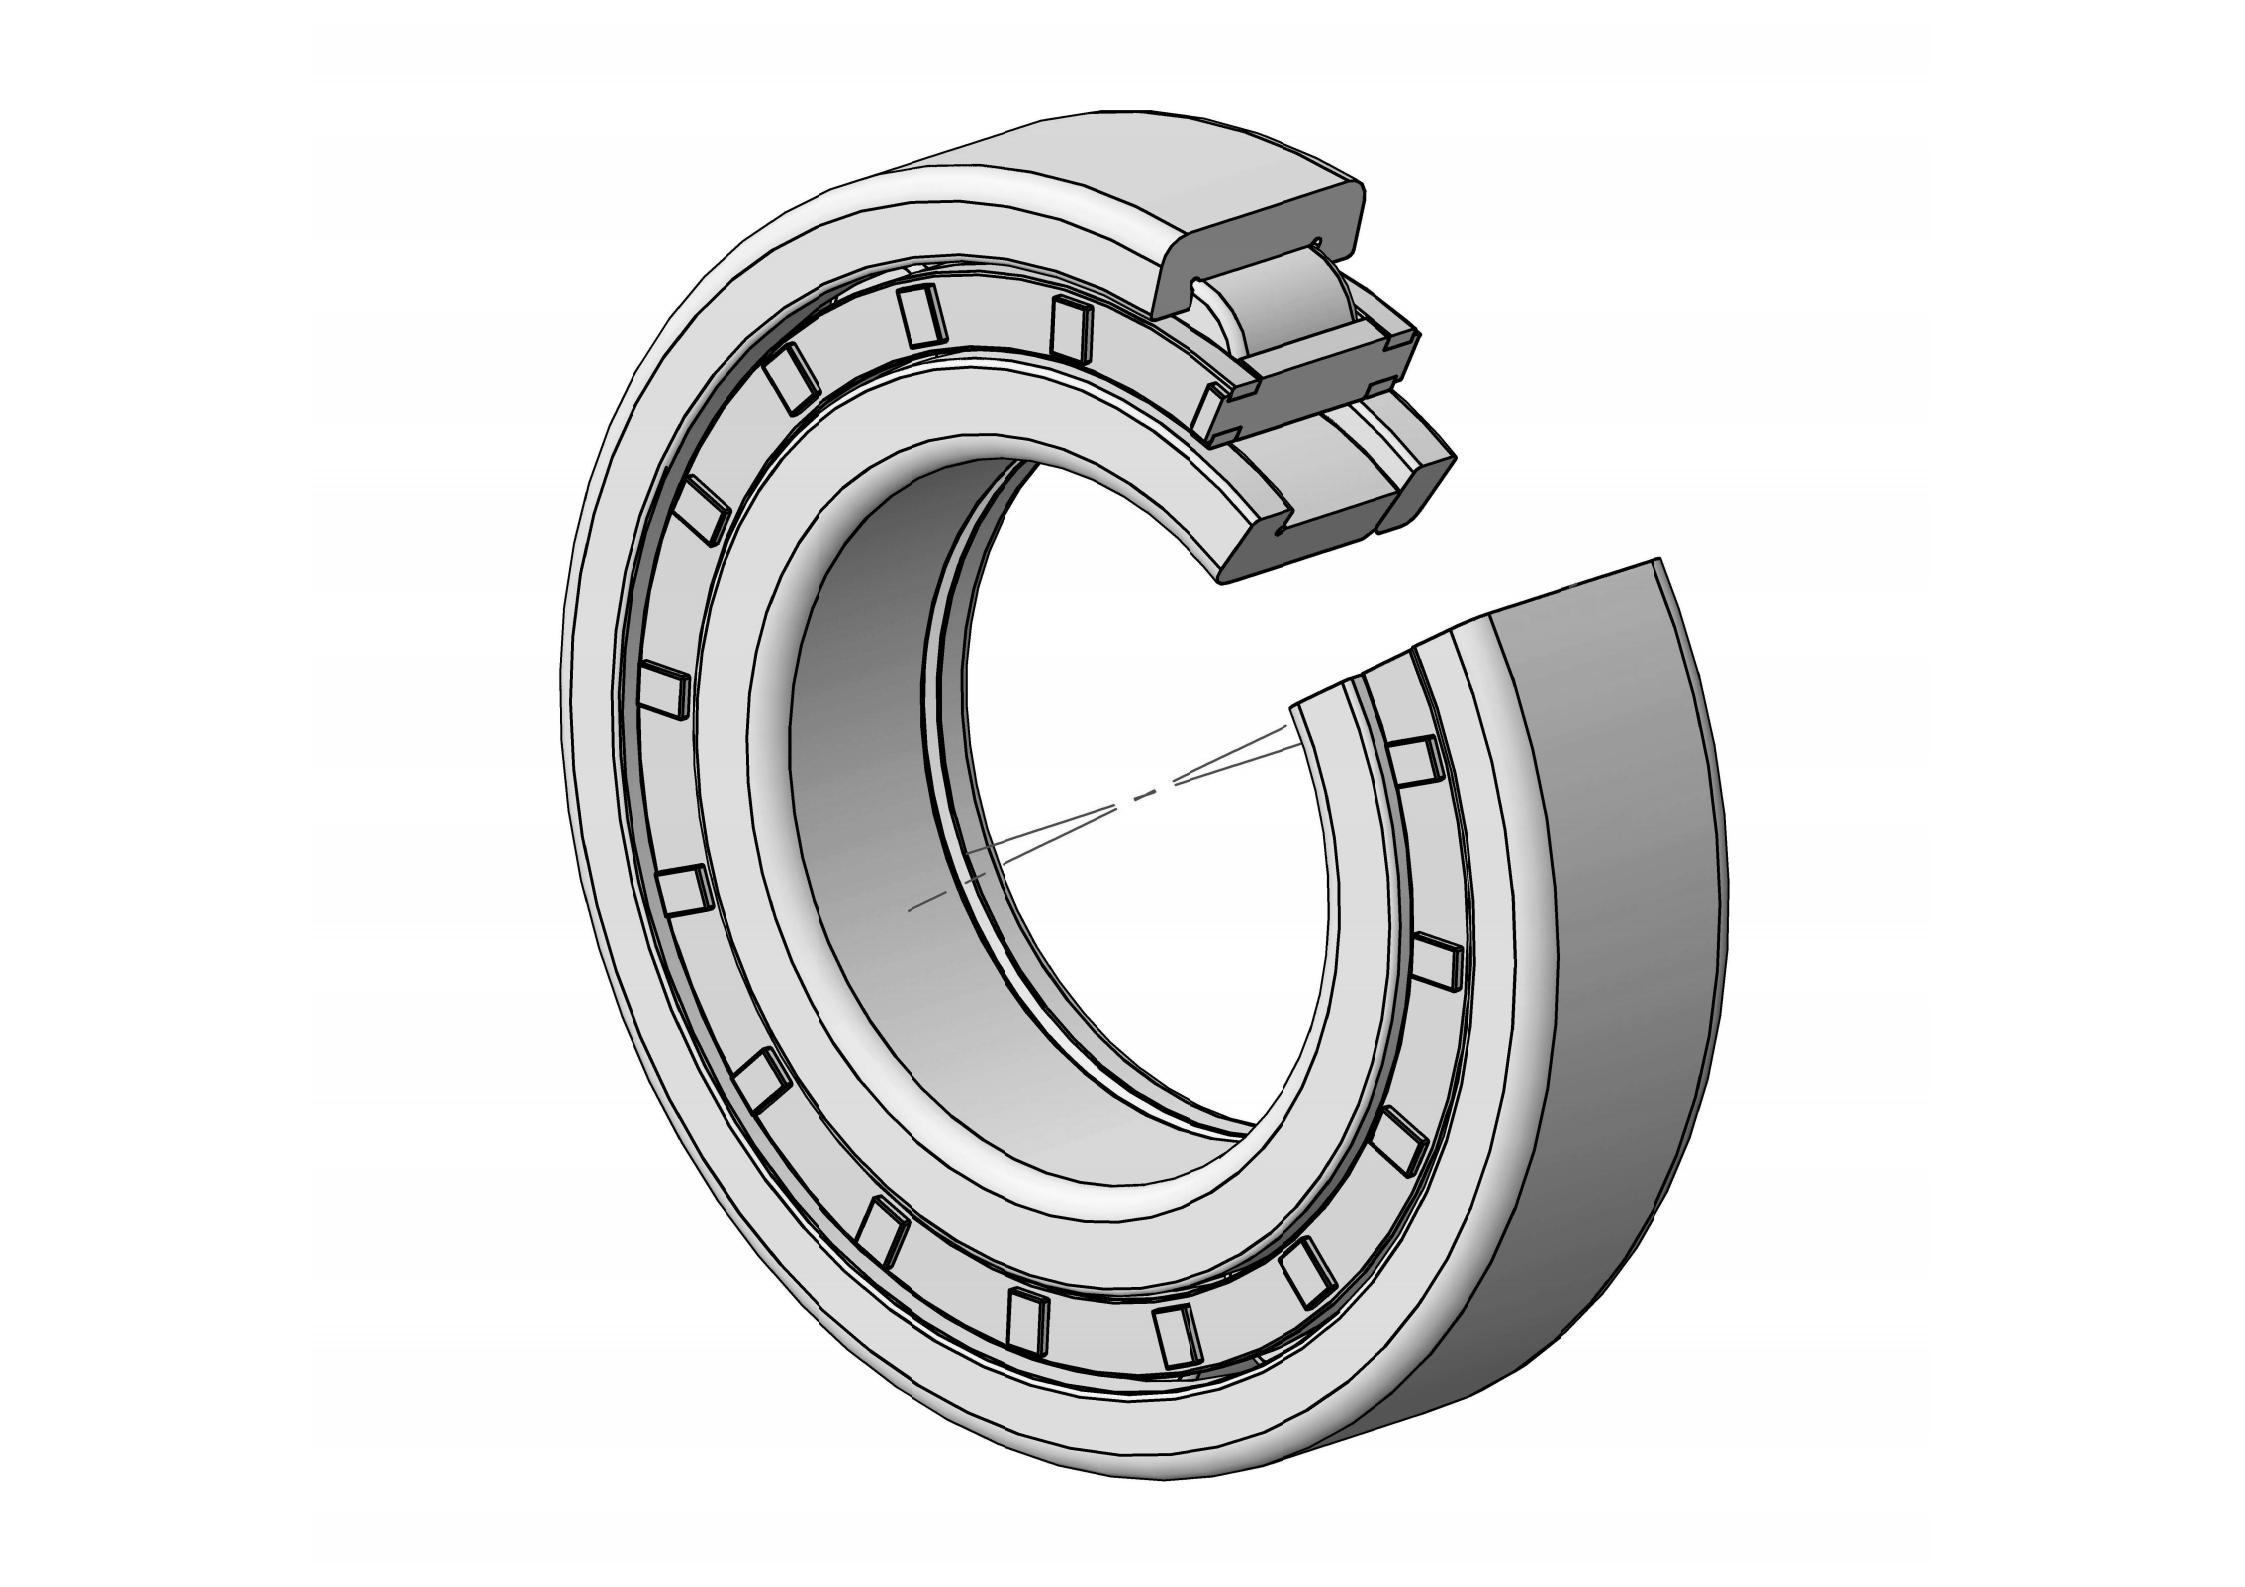 NUP2312-E Single Row Cylindrical roller bearing 